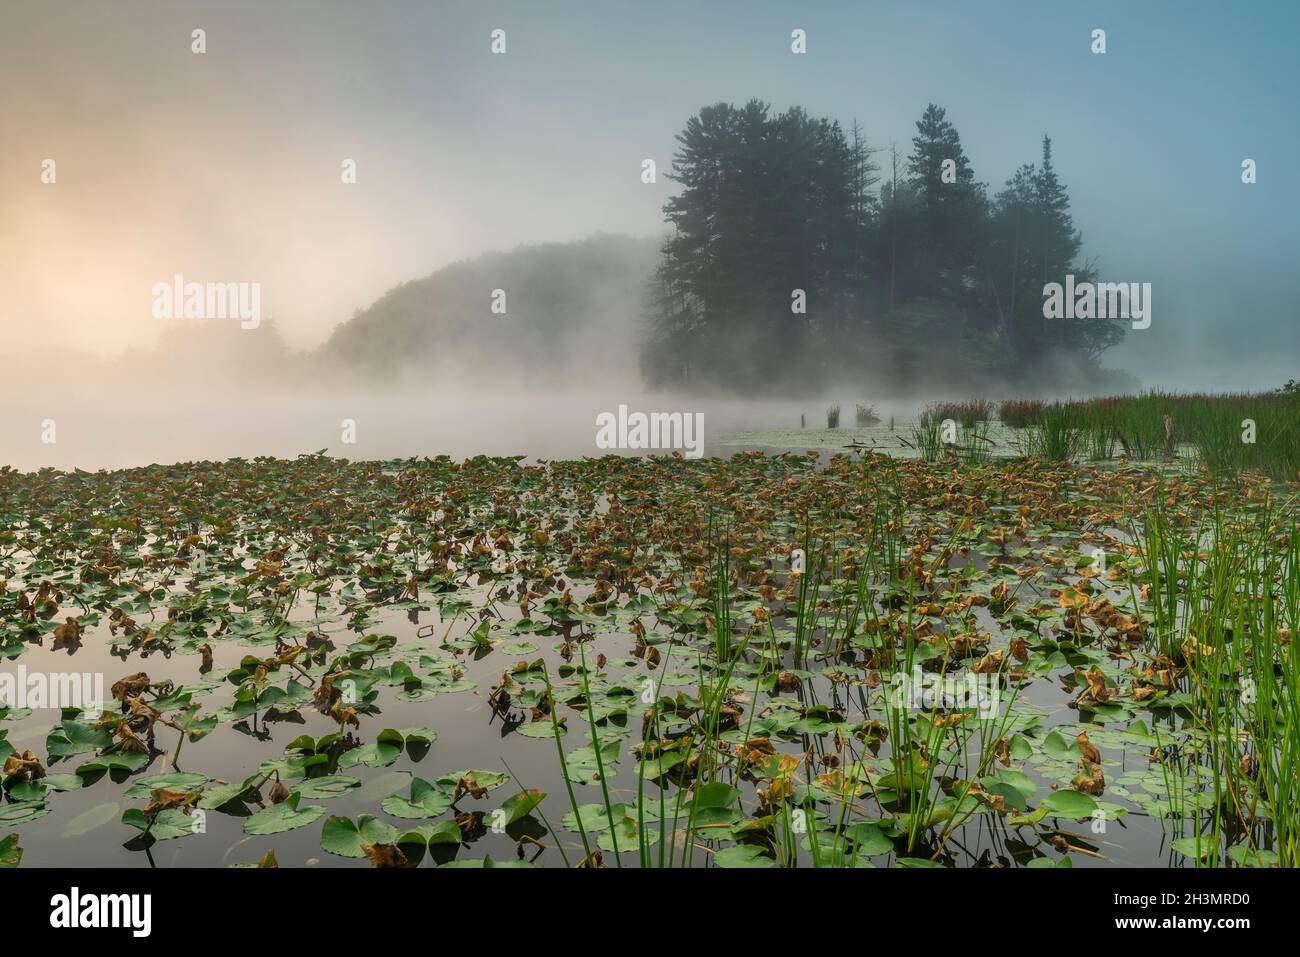 Lily pads et roseaux sur Foggy Red House Lake à Dawn, Allegany State Park, Cattaraugus Co., New York Banque D'Images